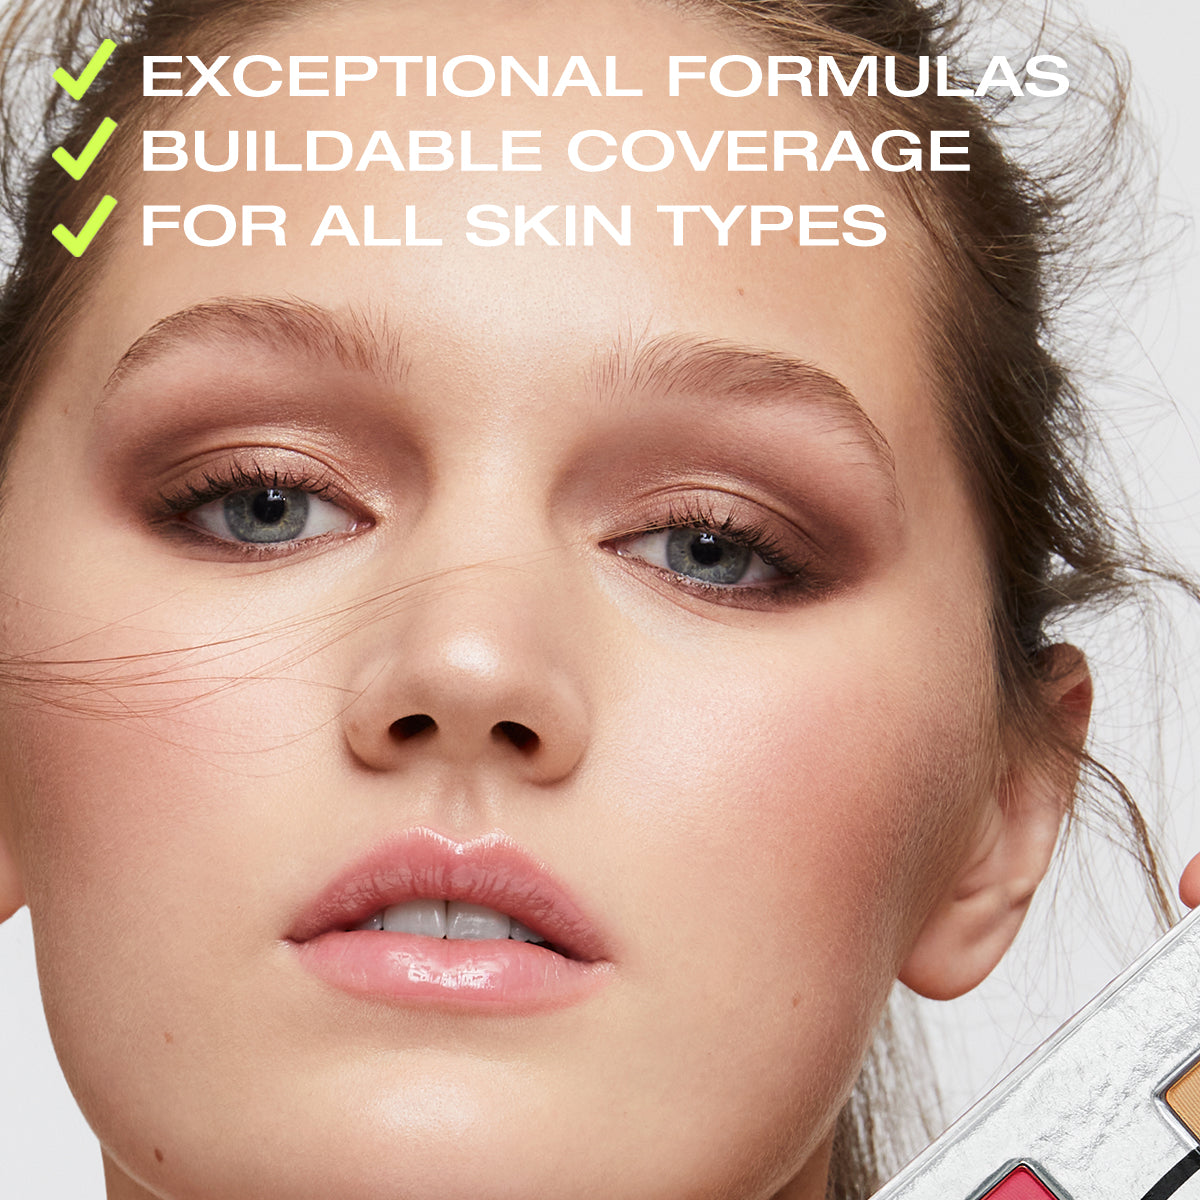 Exceptional formulas, buildable coverage, for all skin types